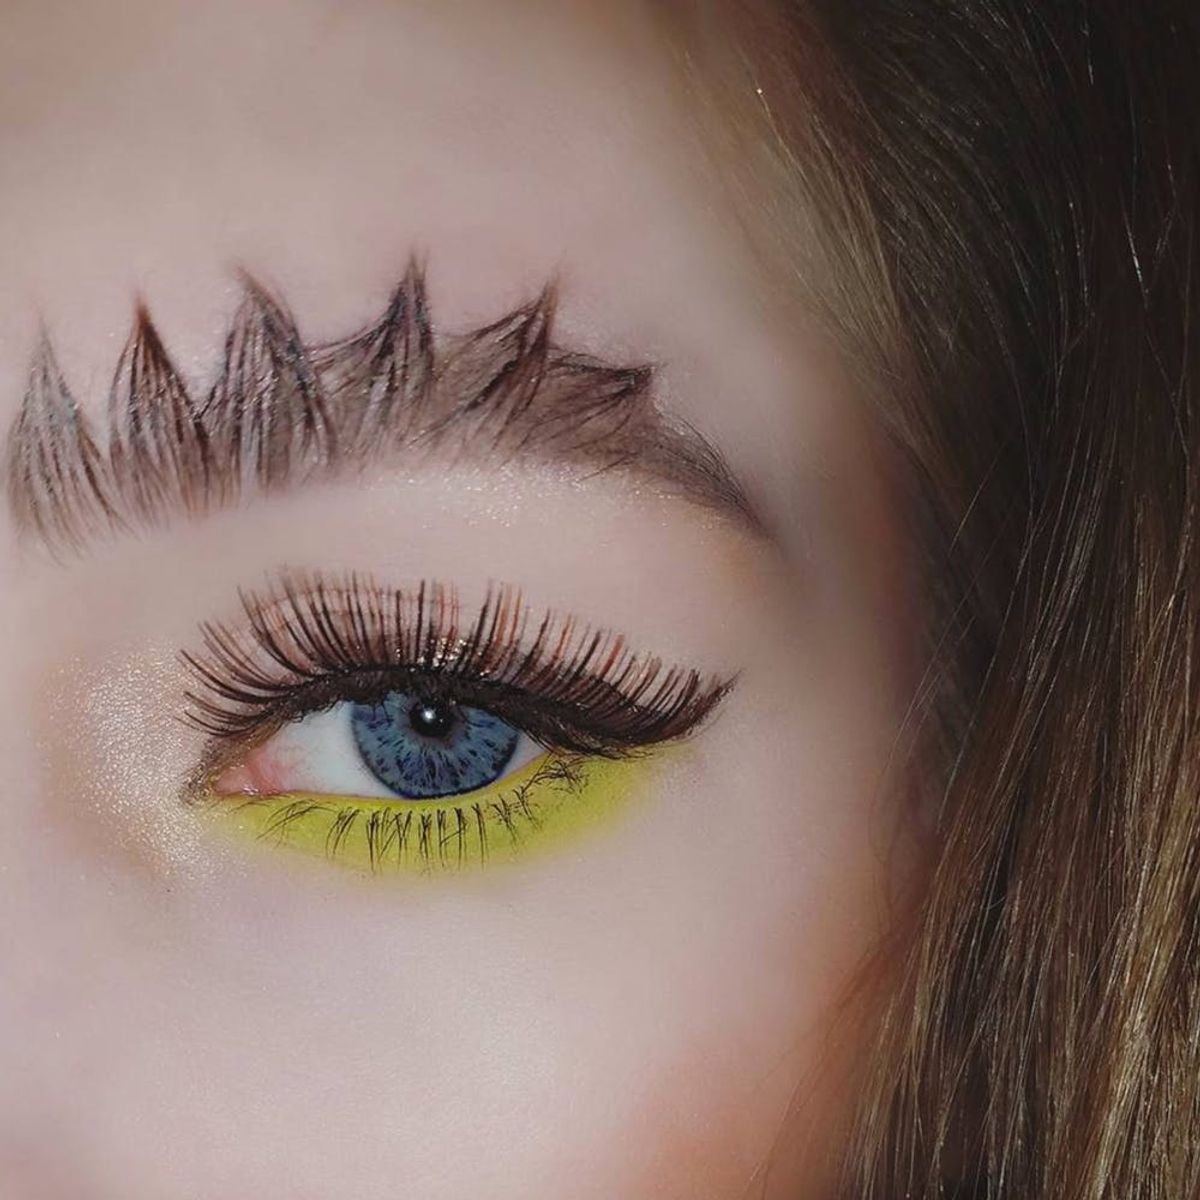 *This* Magical Creature Inspired the Newest Instagram Eyebrow Trend